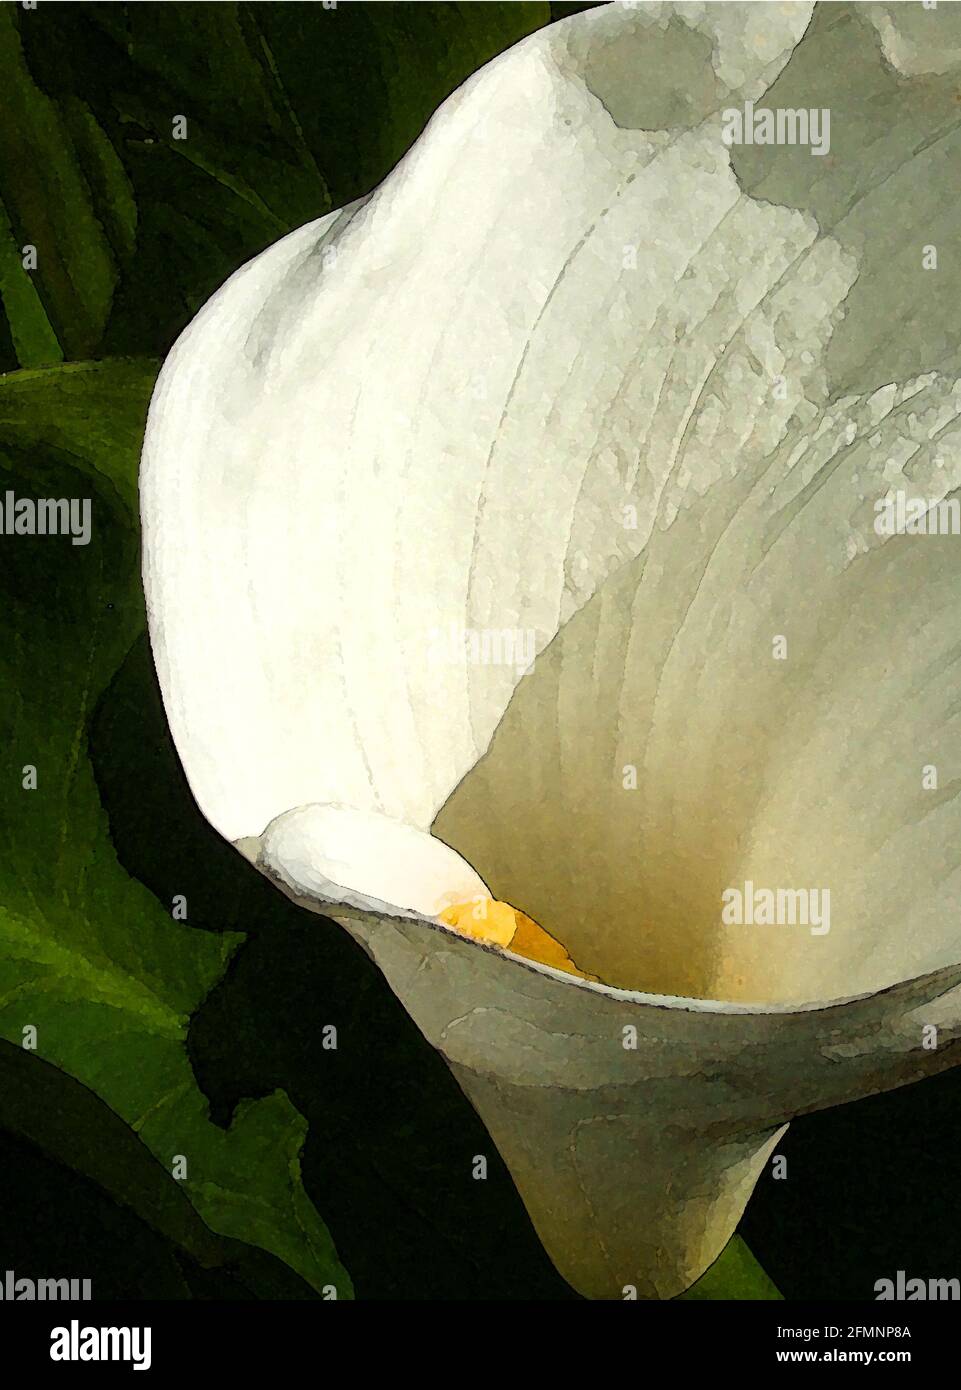 Arum Lily (Zantedeschia aethipica) ‘Crowborough.’ One of Forty-two Iconic Images of English Garden Flowers, Wildflowers and Rural Landscapes. Stock Photo